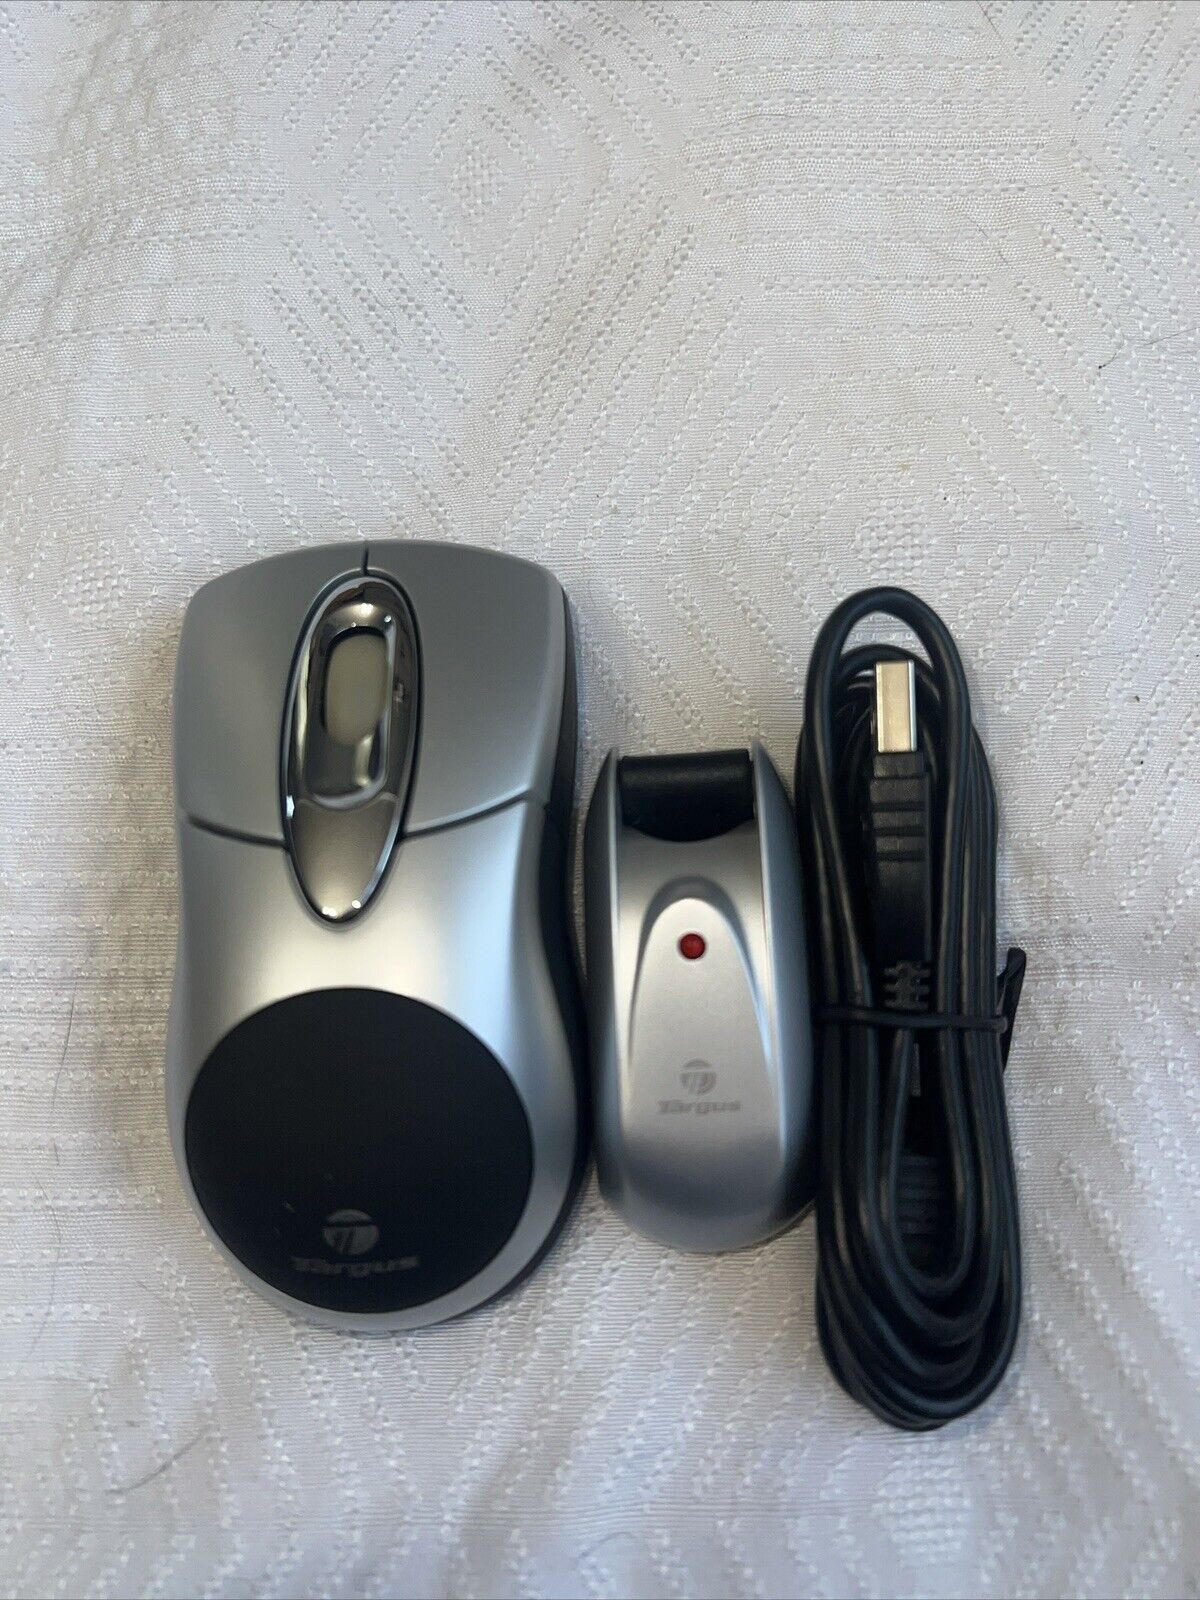 Targus PAWM10U Wireless Optical Mouse USB Receiver Notebook Laptop PC cable